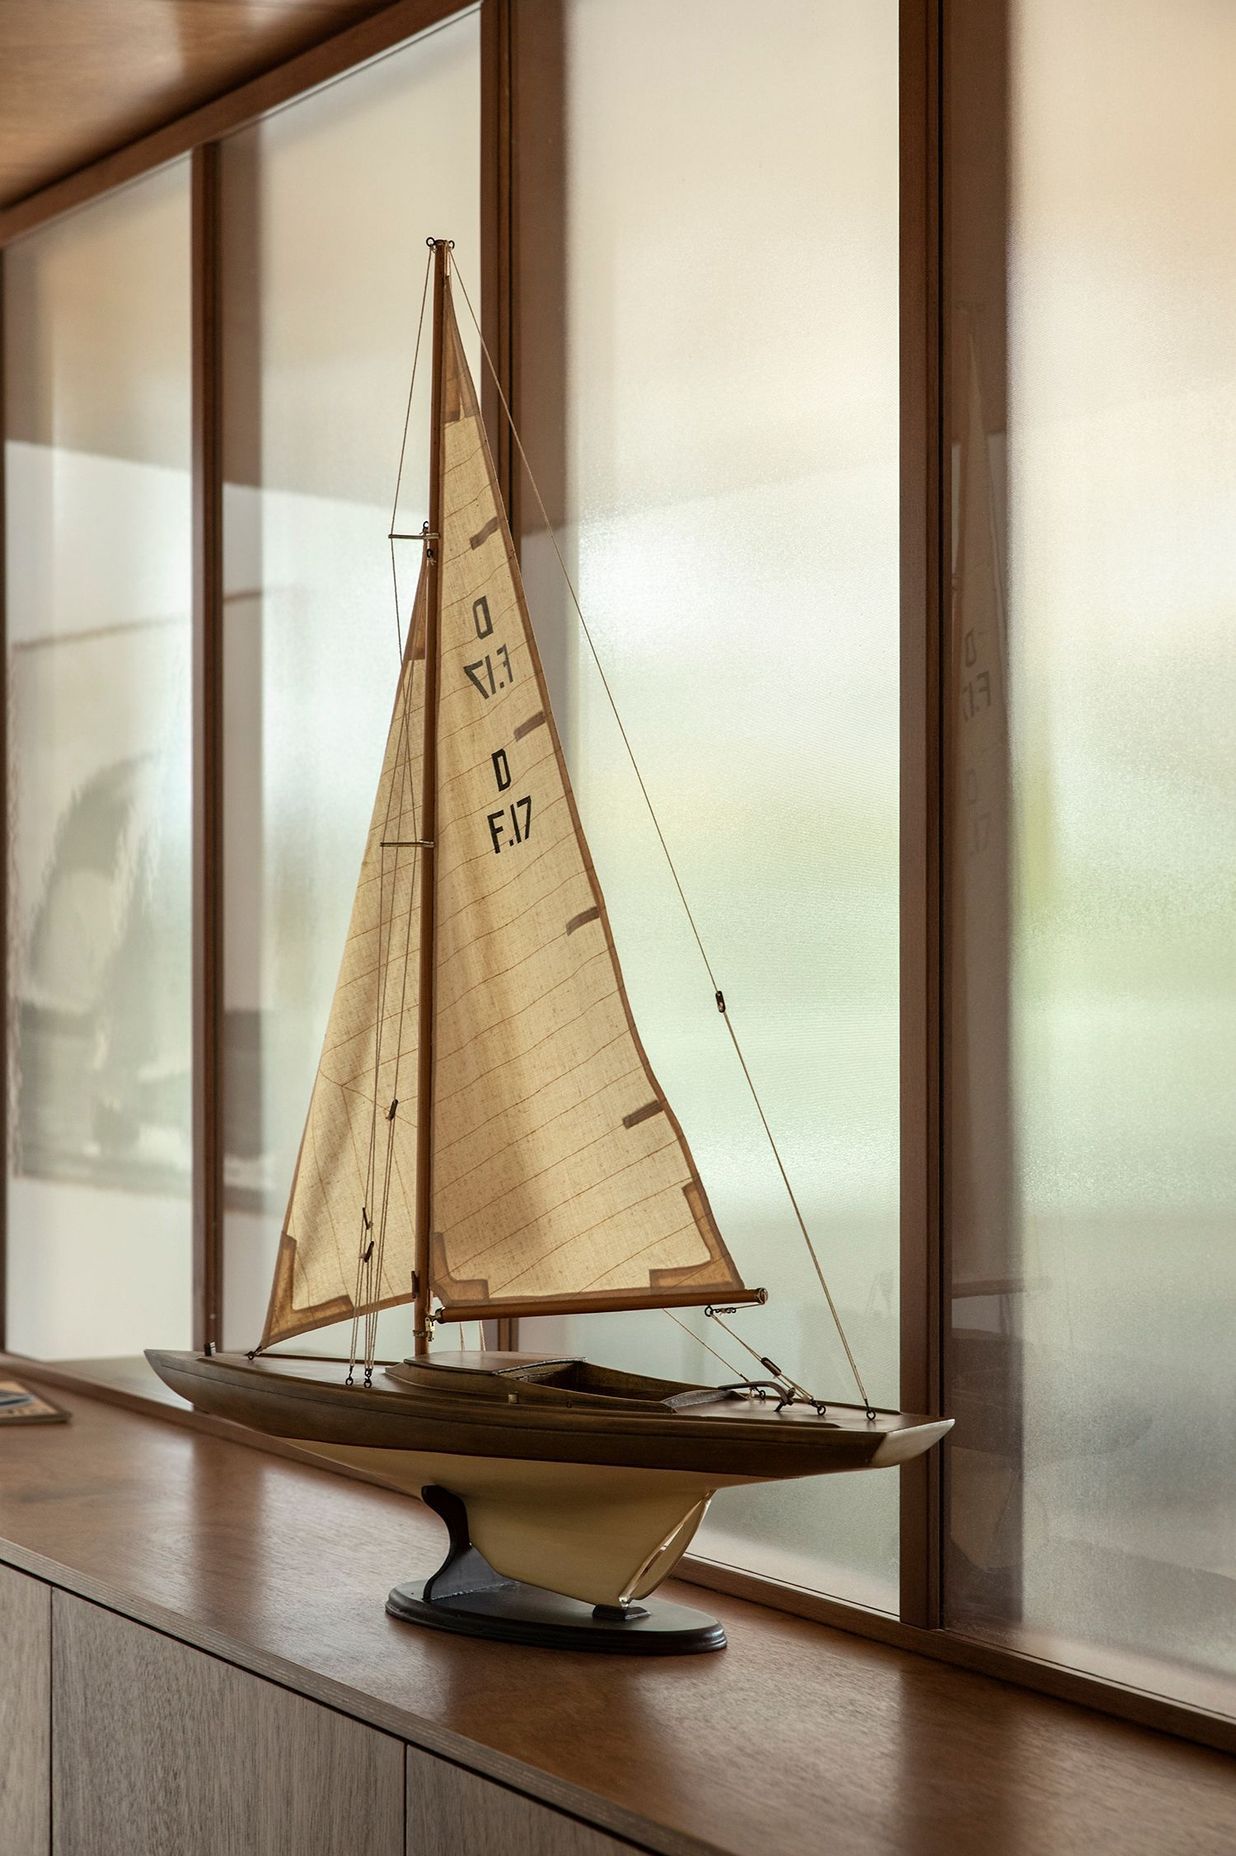 A replica model of the famous Flying Cloud racing yacht.